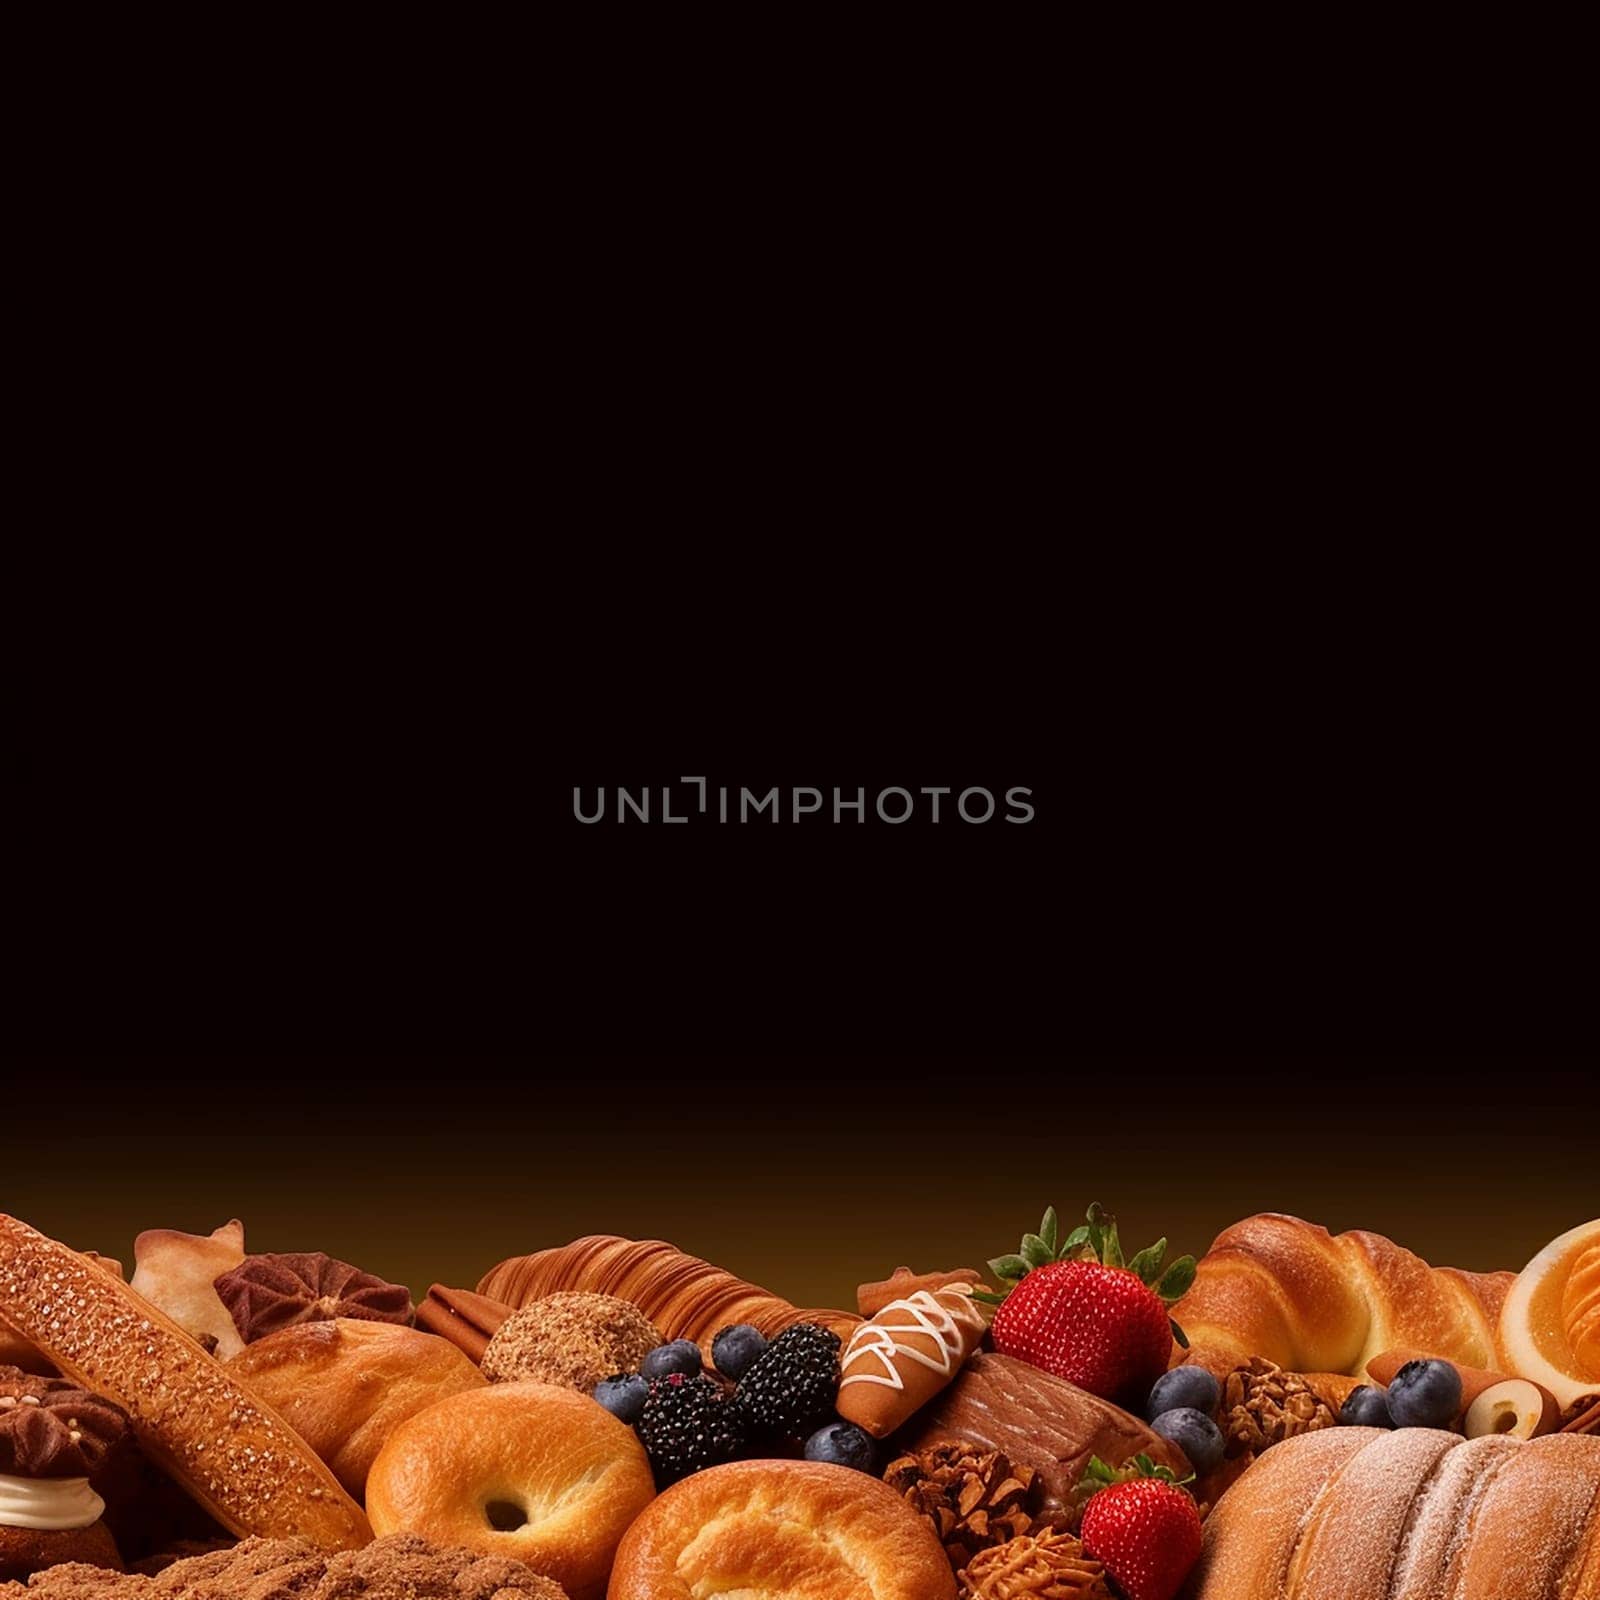 Assorted bakery products with fruits on dark background.